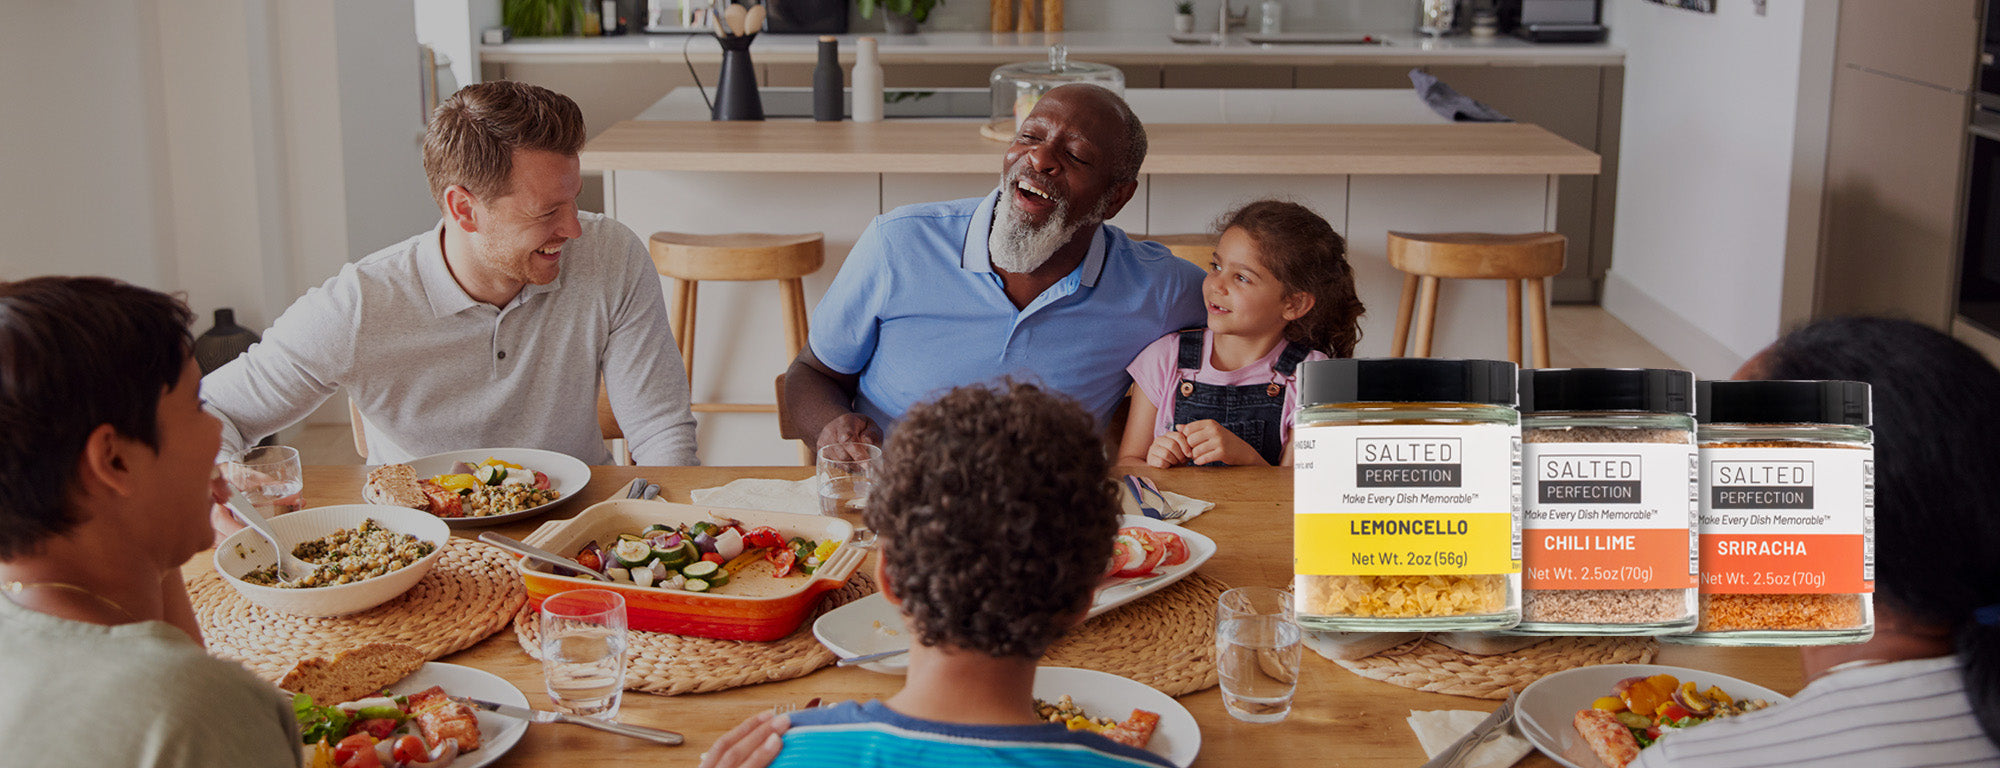 Our products unlock flavor potential for elevated, joyful meals that bring people together